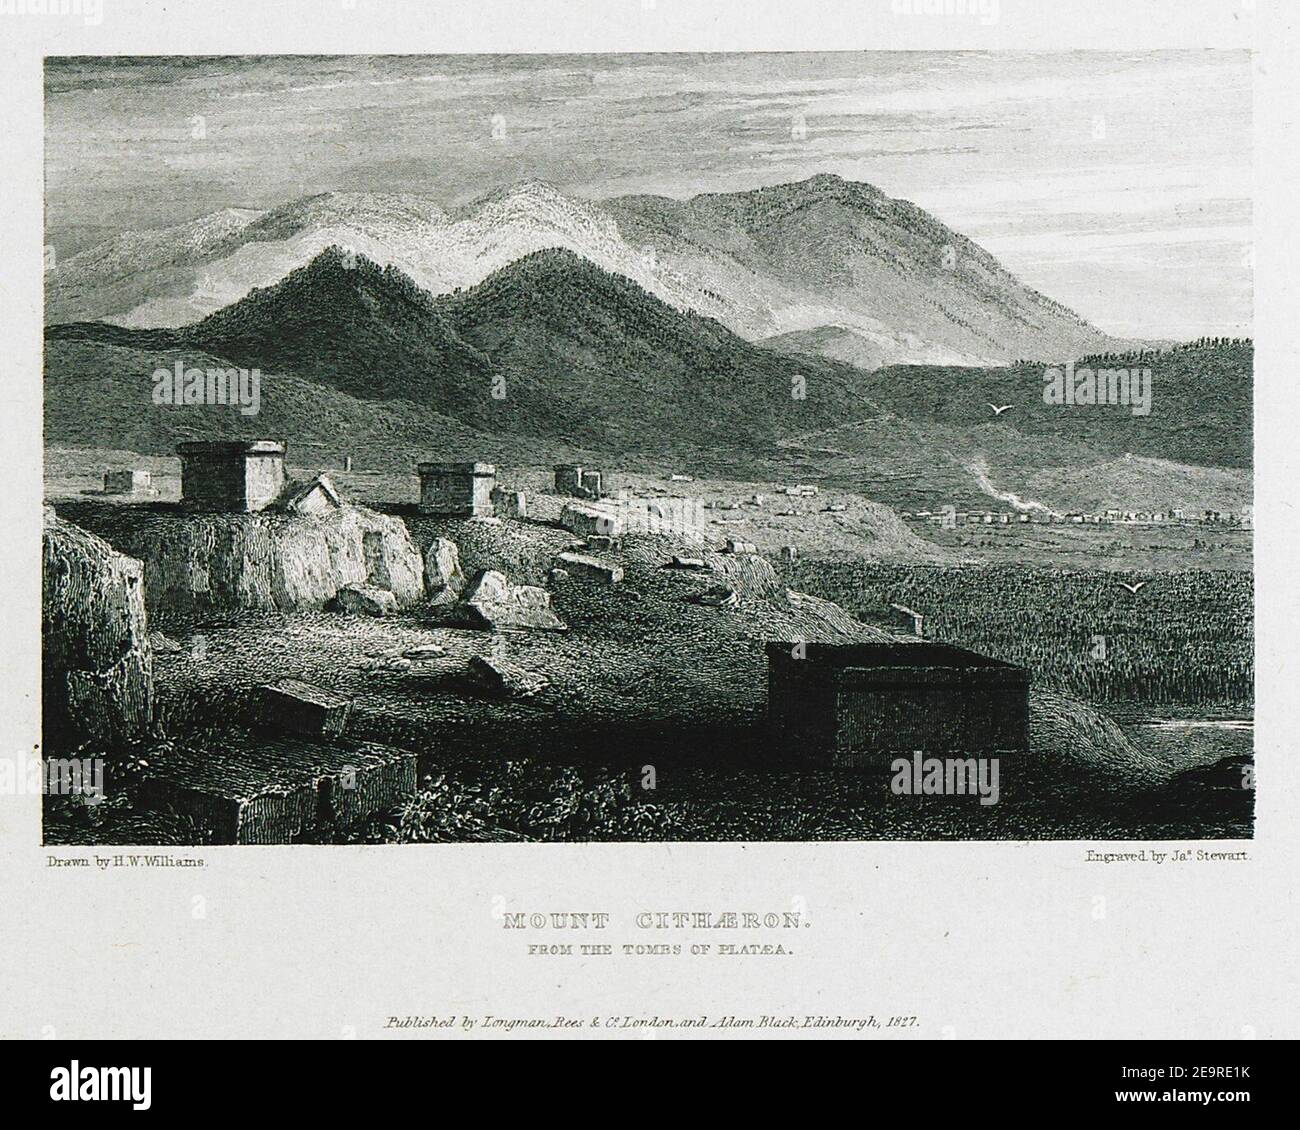 Mount Cithaeron From the tombs of Platea - Williams Hugh William - 1829. Stock Photo